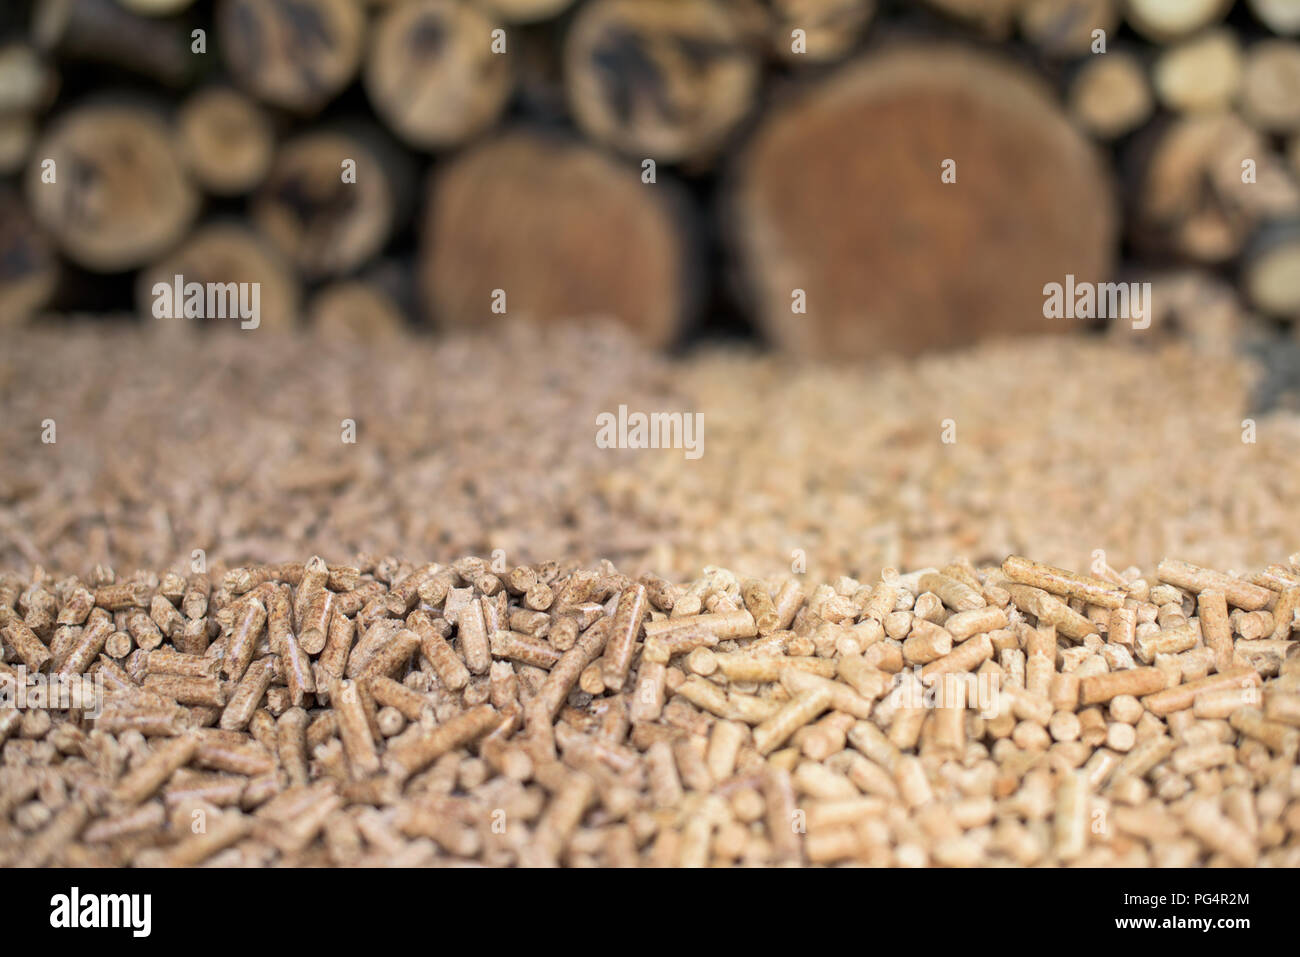 Pile of Oak and pine pellets in front of pile of wood Stock Photo